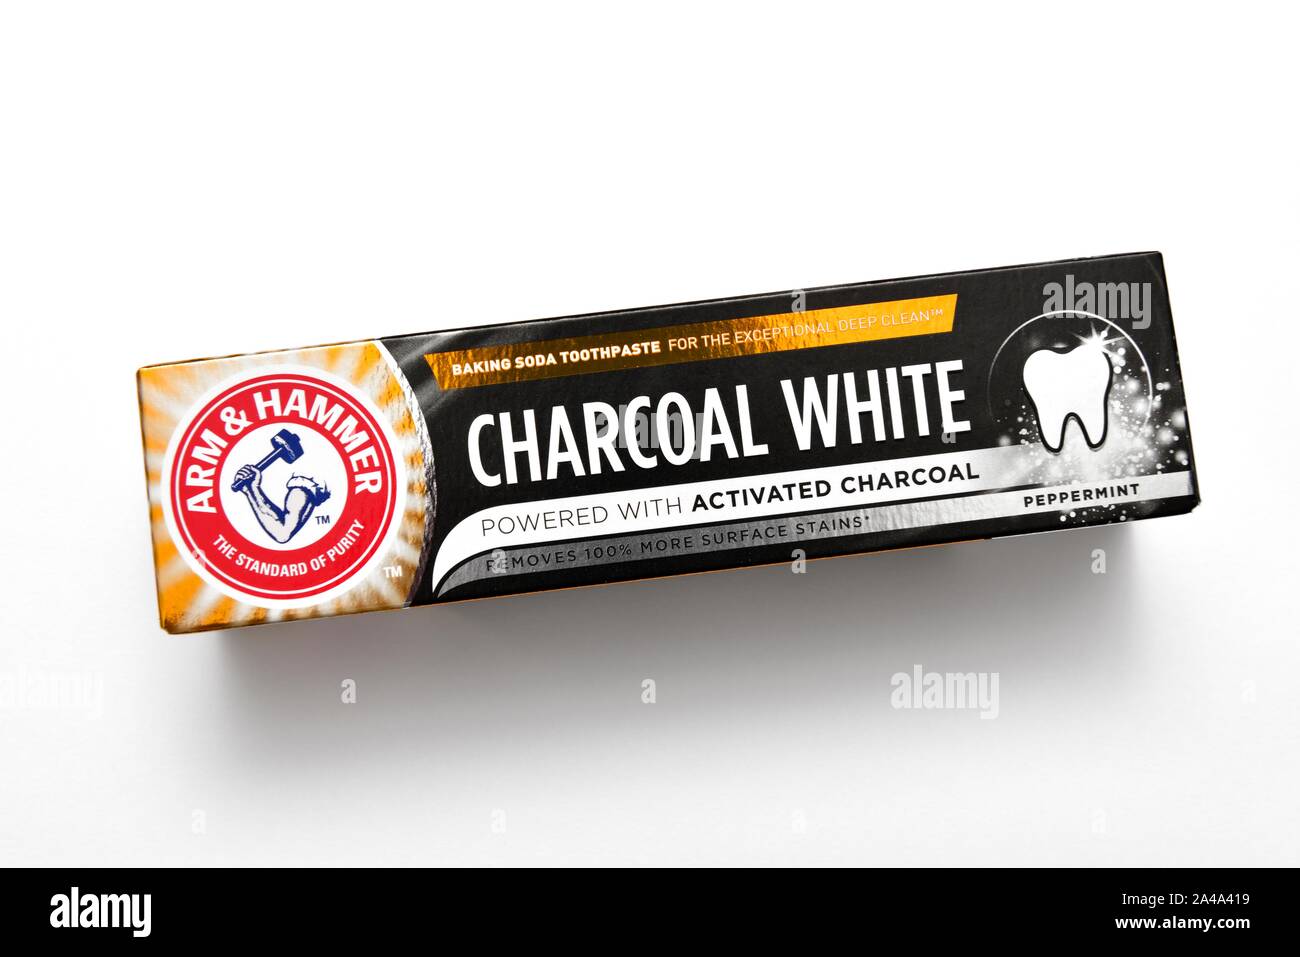 Arm & Hammer,Charcoal white Toothpaste Stock Photo